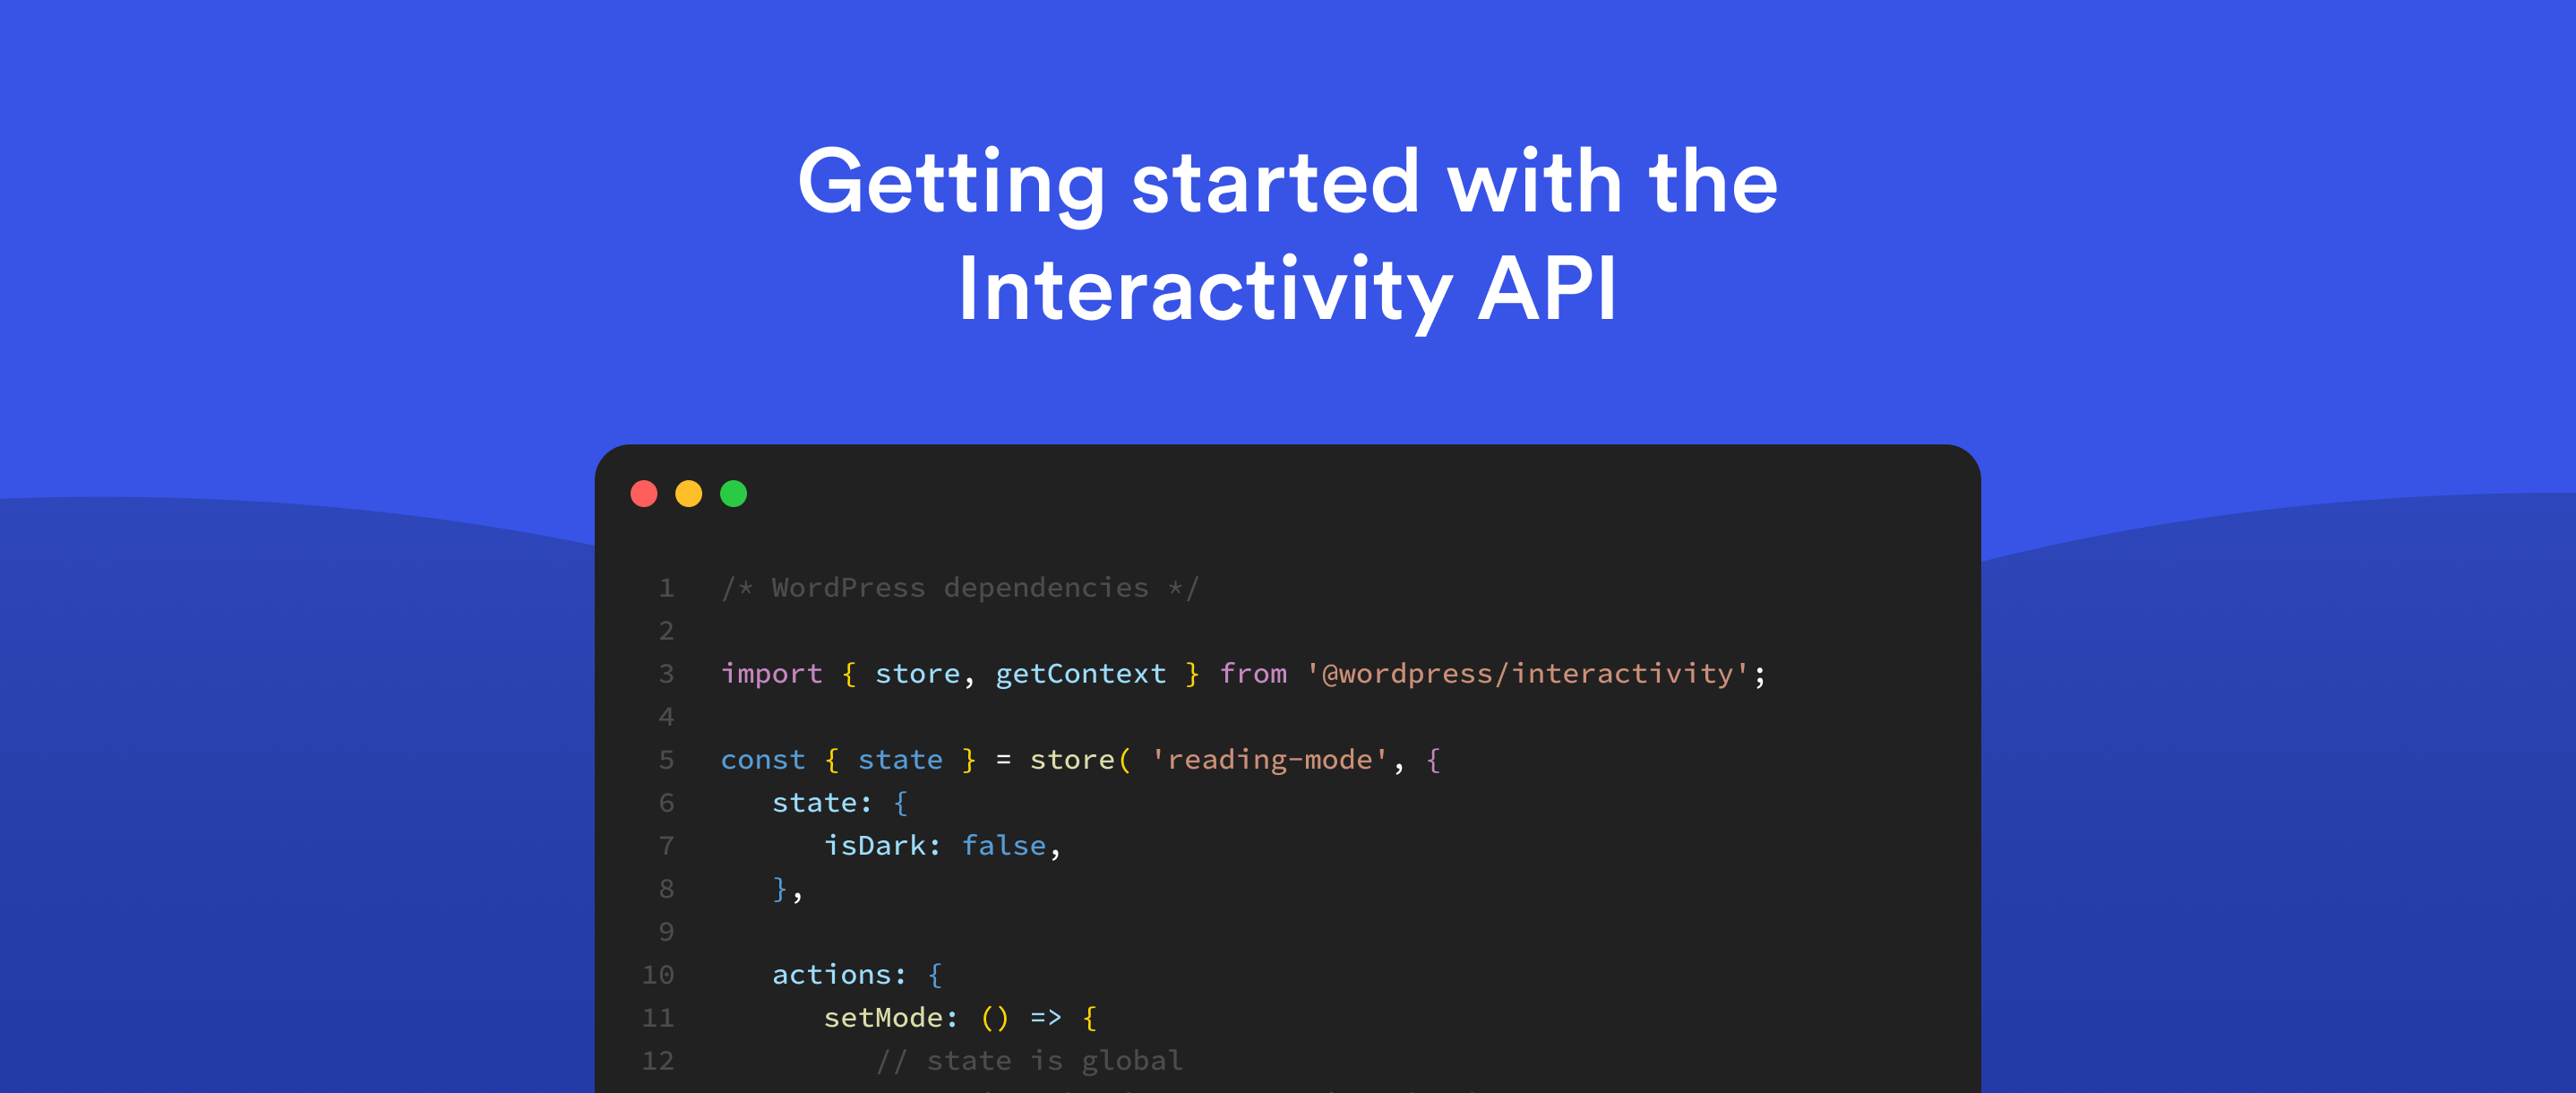 Getting Started with the Interactivity API